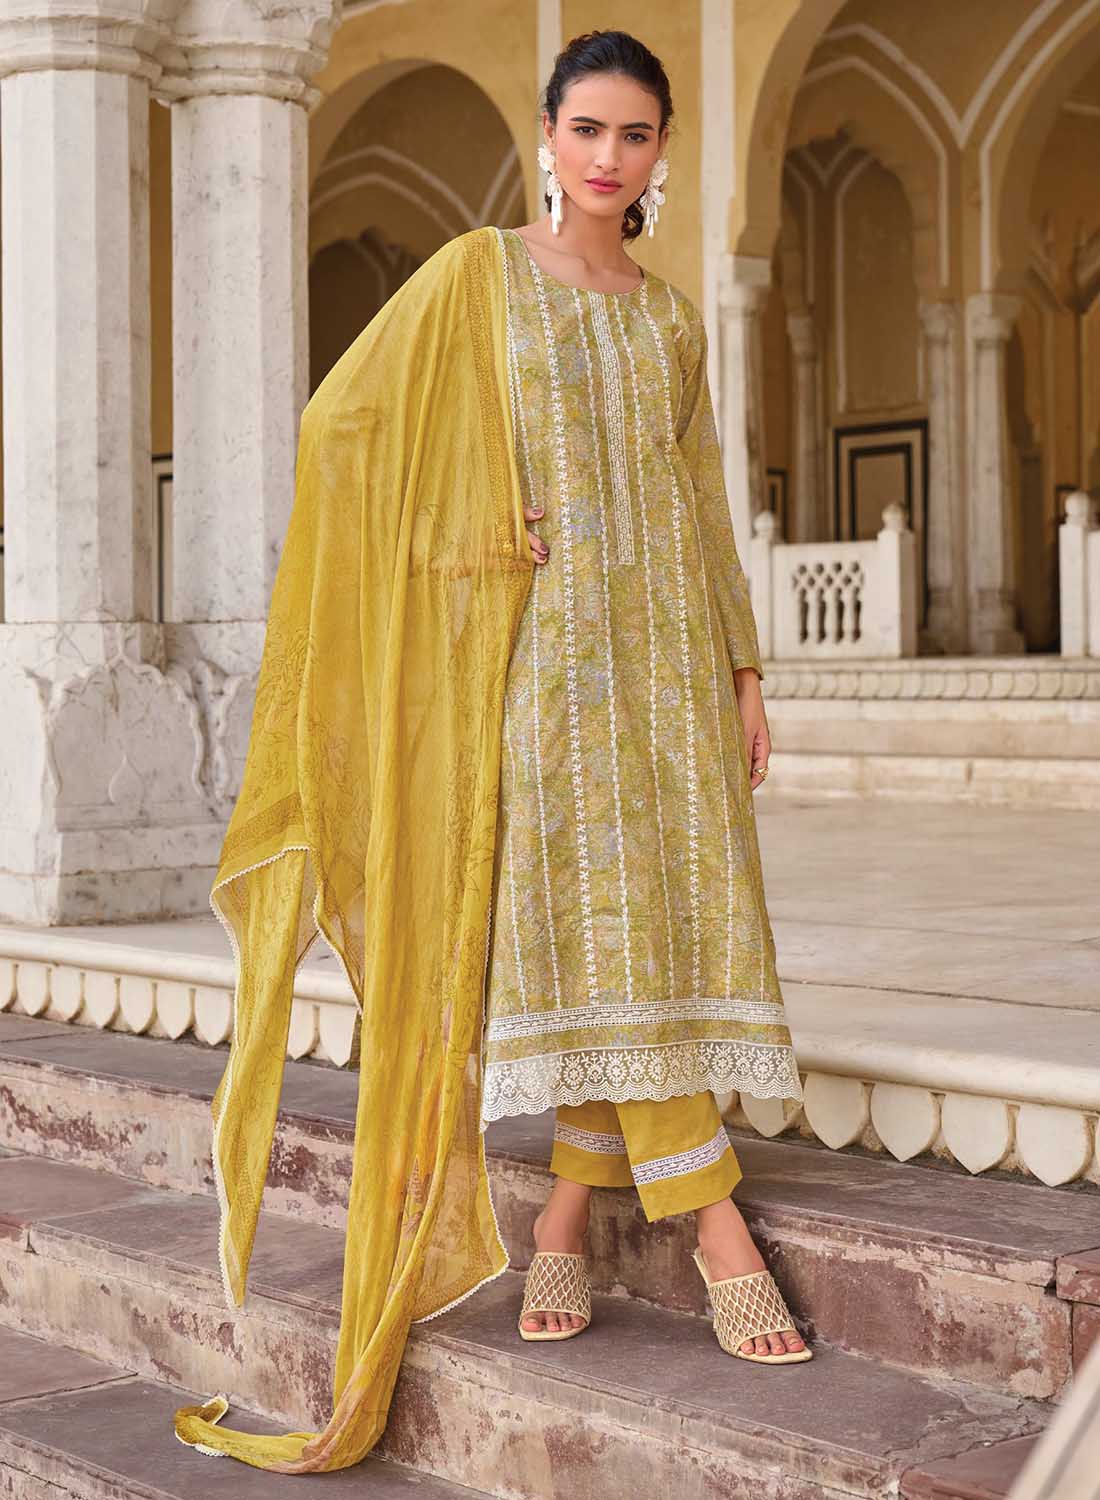 Unstitched Pure Lawn Cotton Suit Fabric Dress Material for Women